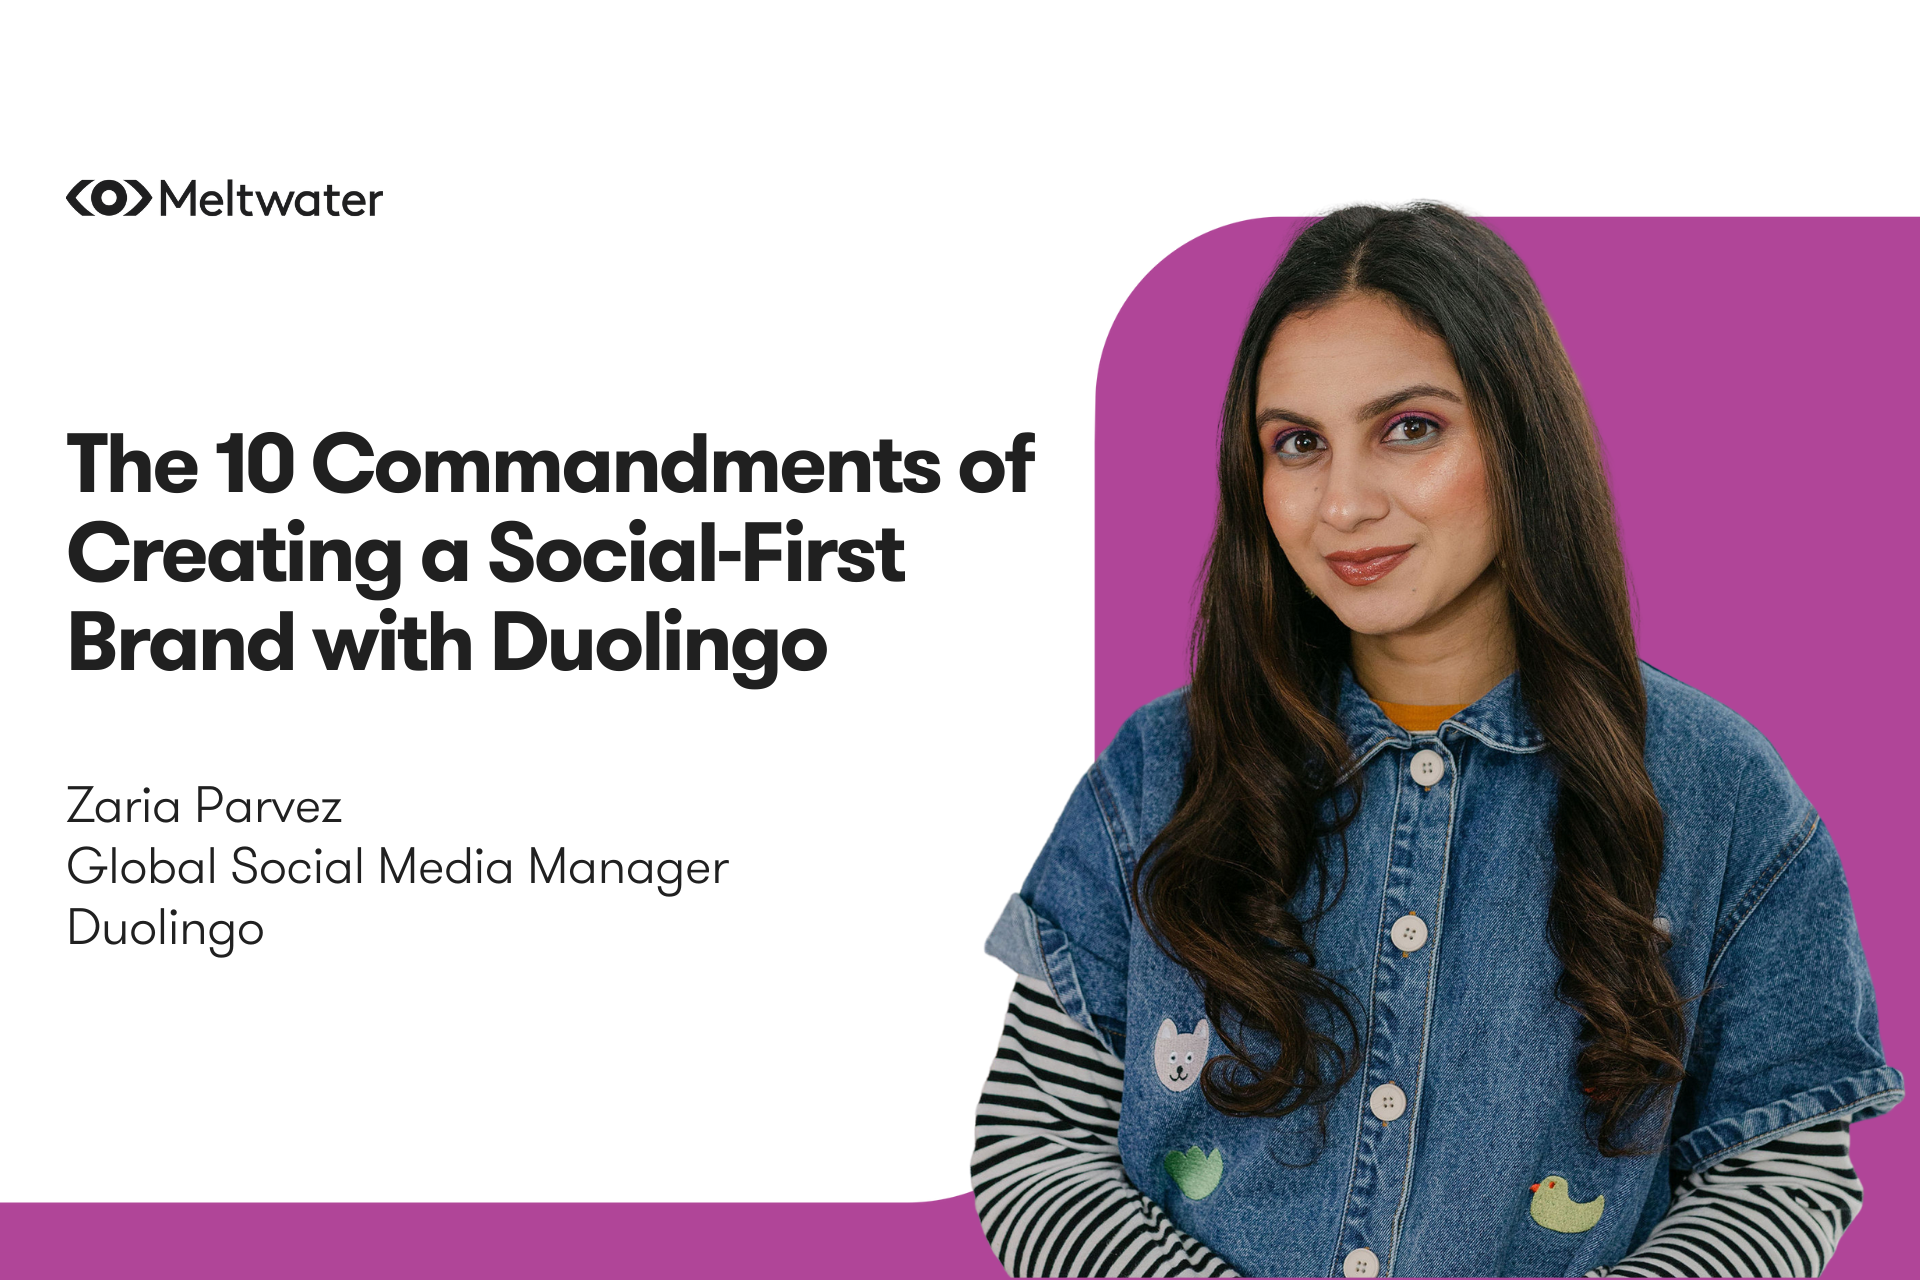 The 10 Commandments of Creating a Social-First Brand with Duolingo